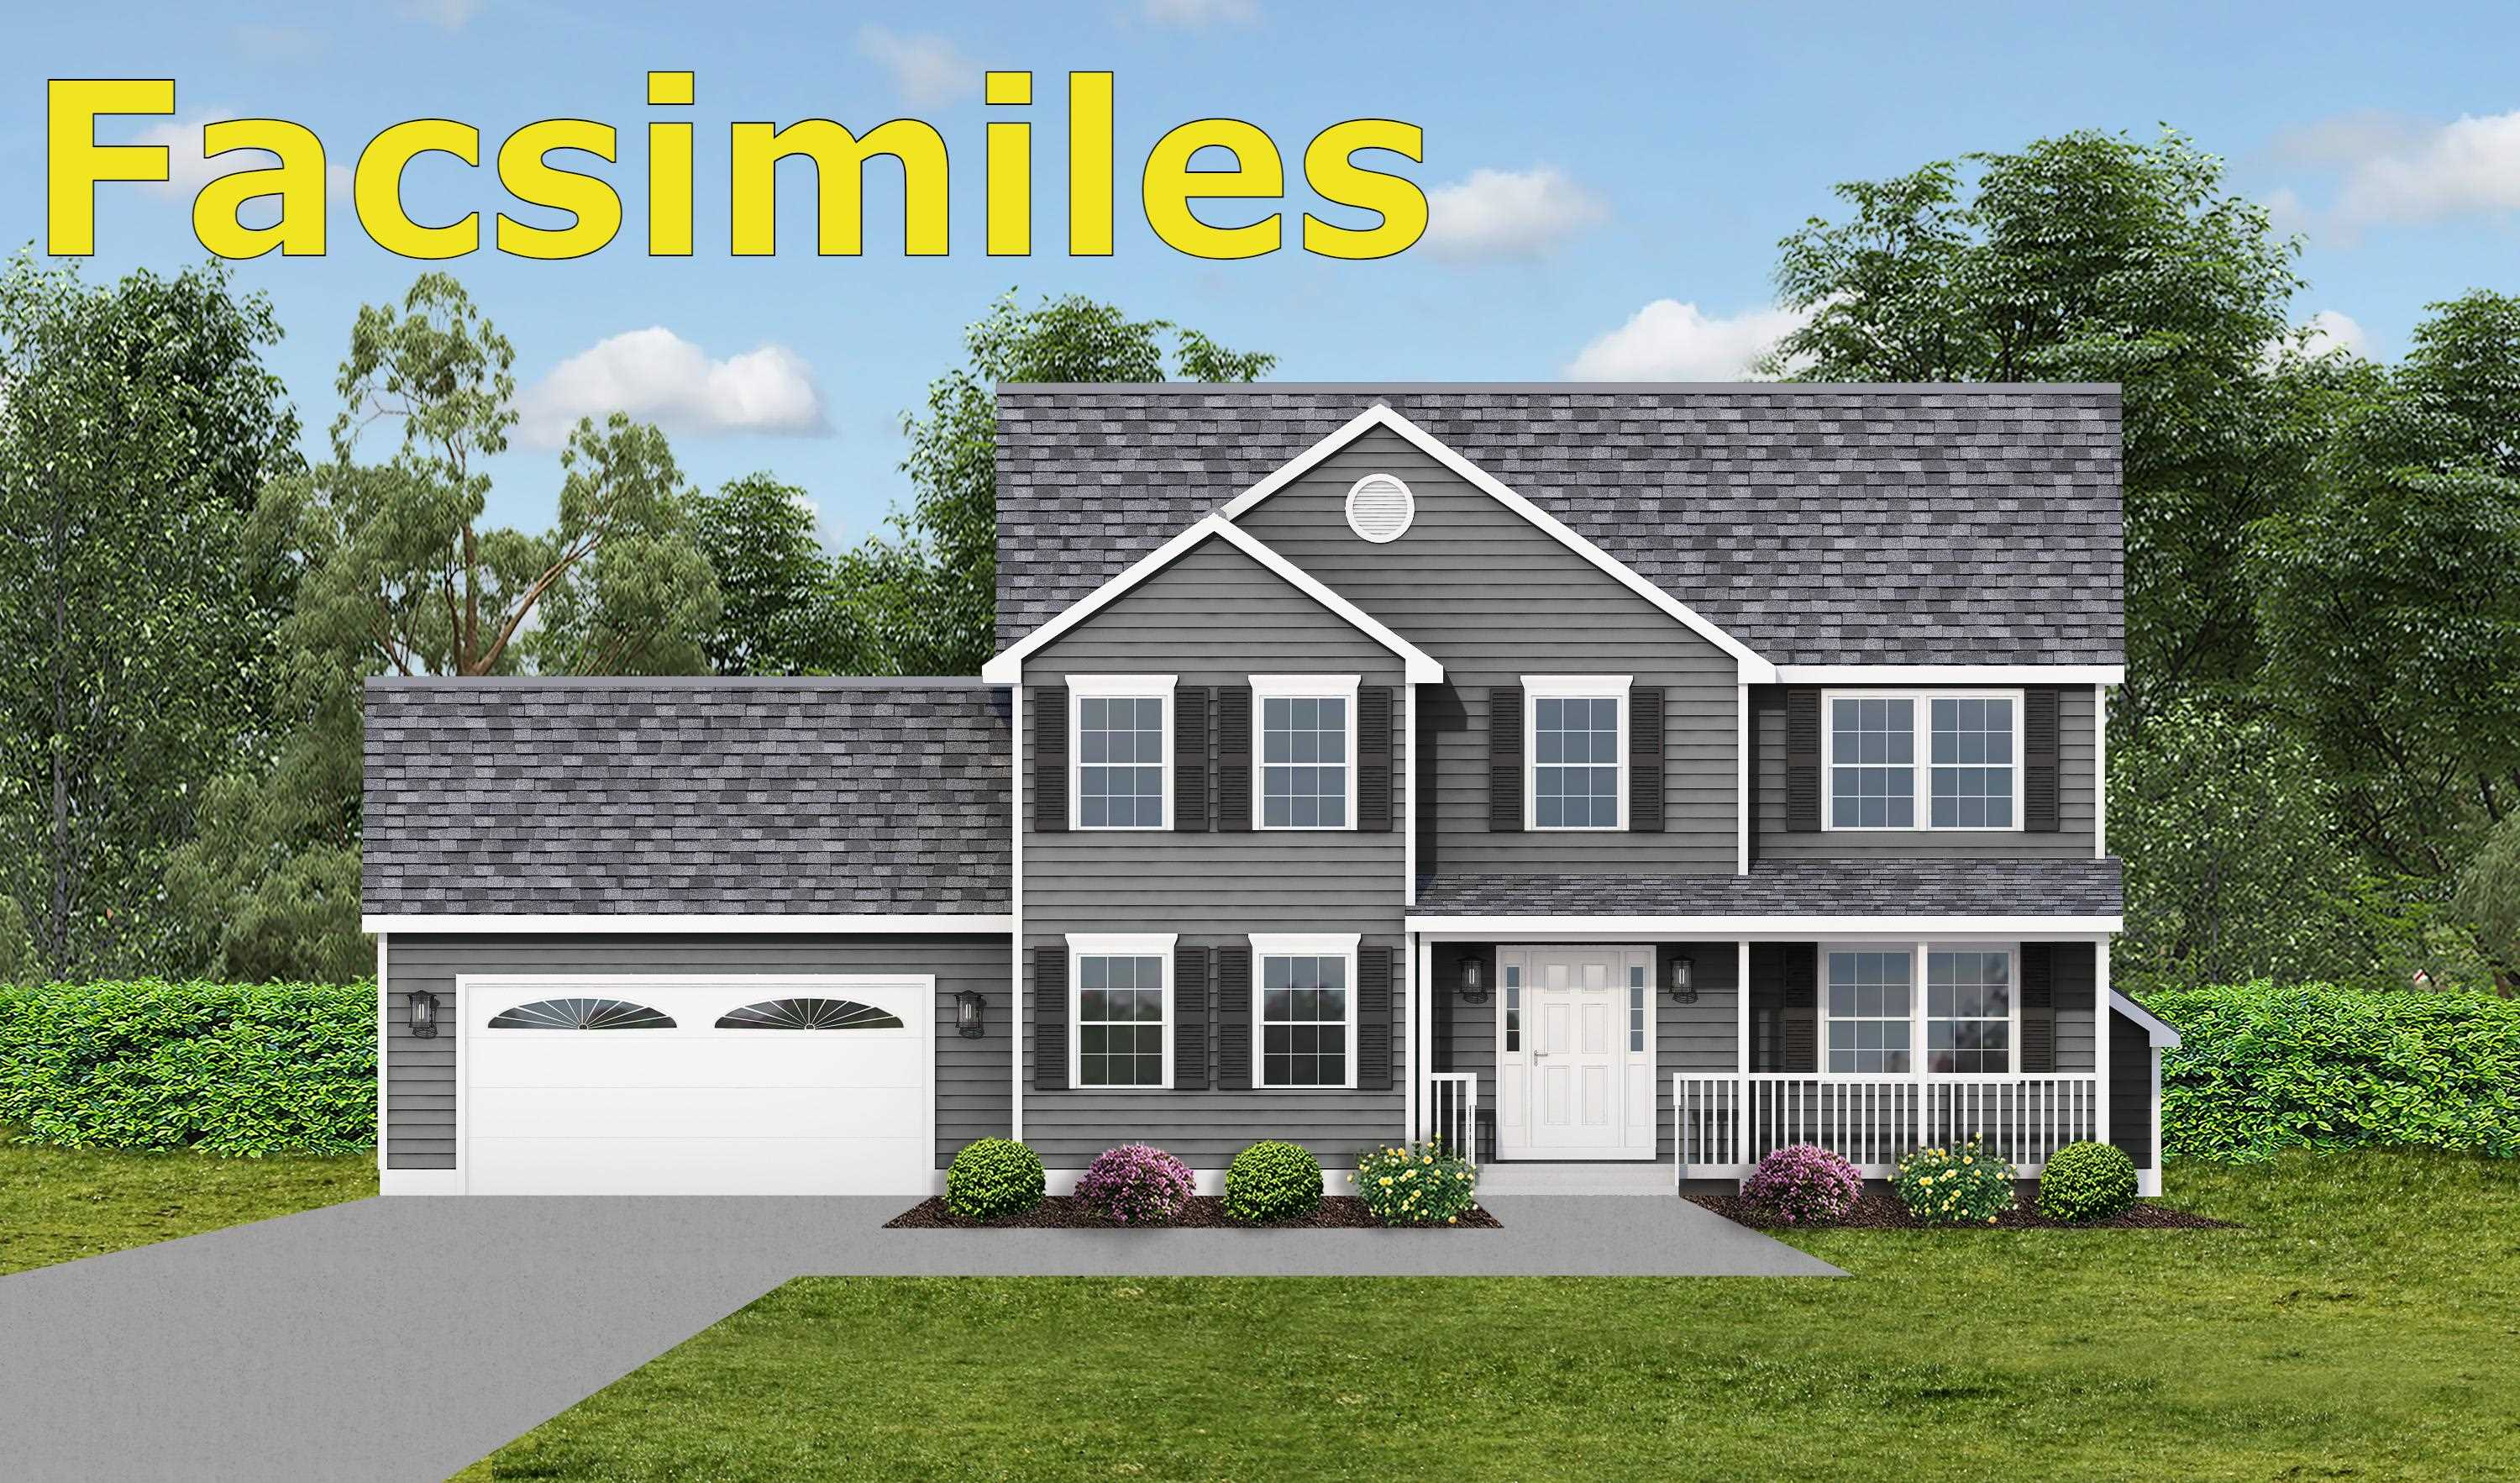 THE SPRINGFIELD II with 2,190 sq.ft. of living space and a 24 foot farmer  porch and a 12'x12' composite deck is one of SADDLEBACK ESTATES home plan offering! We are located in South Nashua! Walking distance to Rivier University and The Nashua Country Club  This is an 11-lot subdivision cul-de-sac community that is certainly to be in demand.  This is or pre-construction pricing and offering information. (To check out the cul-de-sac location GPS 36 Fifield Rd Nashua NH. The road is now paved and construction is beginning. Delivery date of the homes is 5-6 months from signing of contract to purchase. We do have an offsite model home available for your viewing or you can view the property on our video tour posted in this listing.)  There are several additional floor plans to choose from including our Ranch style. All our homes contains all that you expect to have in your dream home. Open floor plans, Hardwood in all rooms except bedrooms with option for hardwood throughout!  Tile bathroom flooring, Separate laundry room in some models, gas fireplace included in all with a 12'x12' composite deck off the Dining area . Granite counter tops. Come pick your lot and  pick your style of home watch us build your dream home.   (all of the  photos are facsimiles and some taken at our off site furnished model... Schedule a time to visit now!)